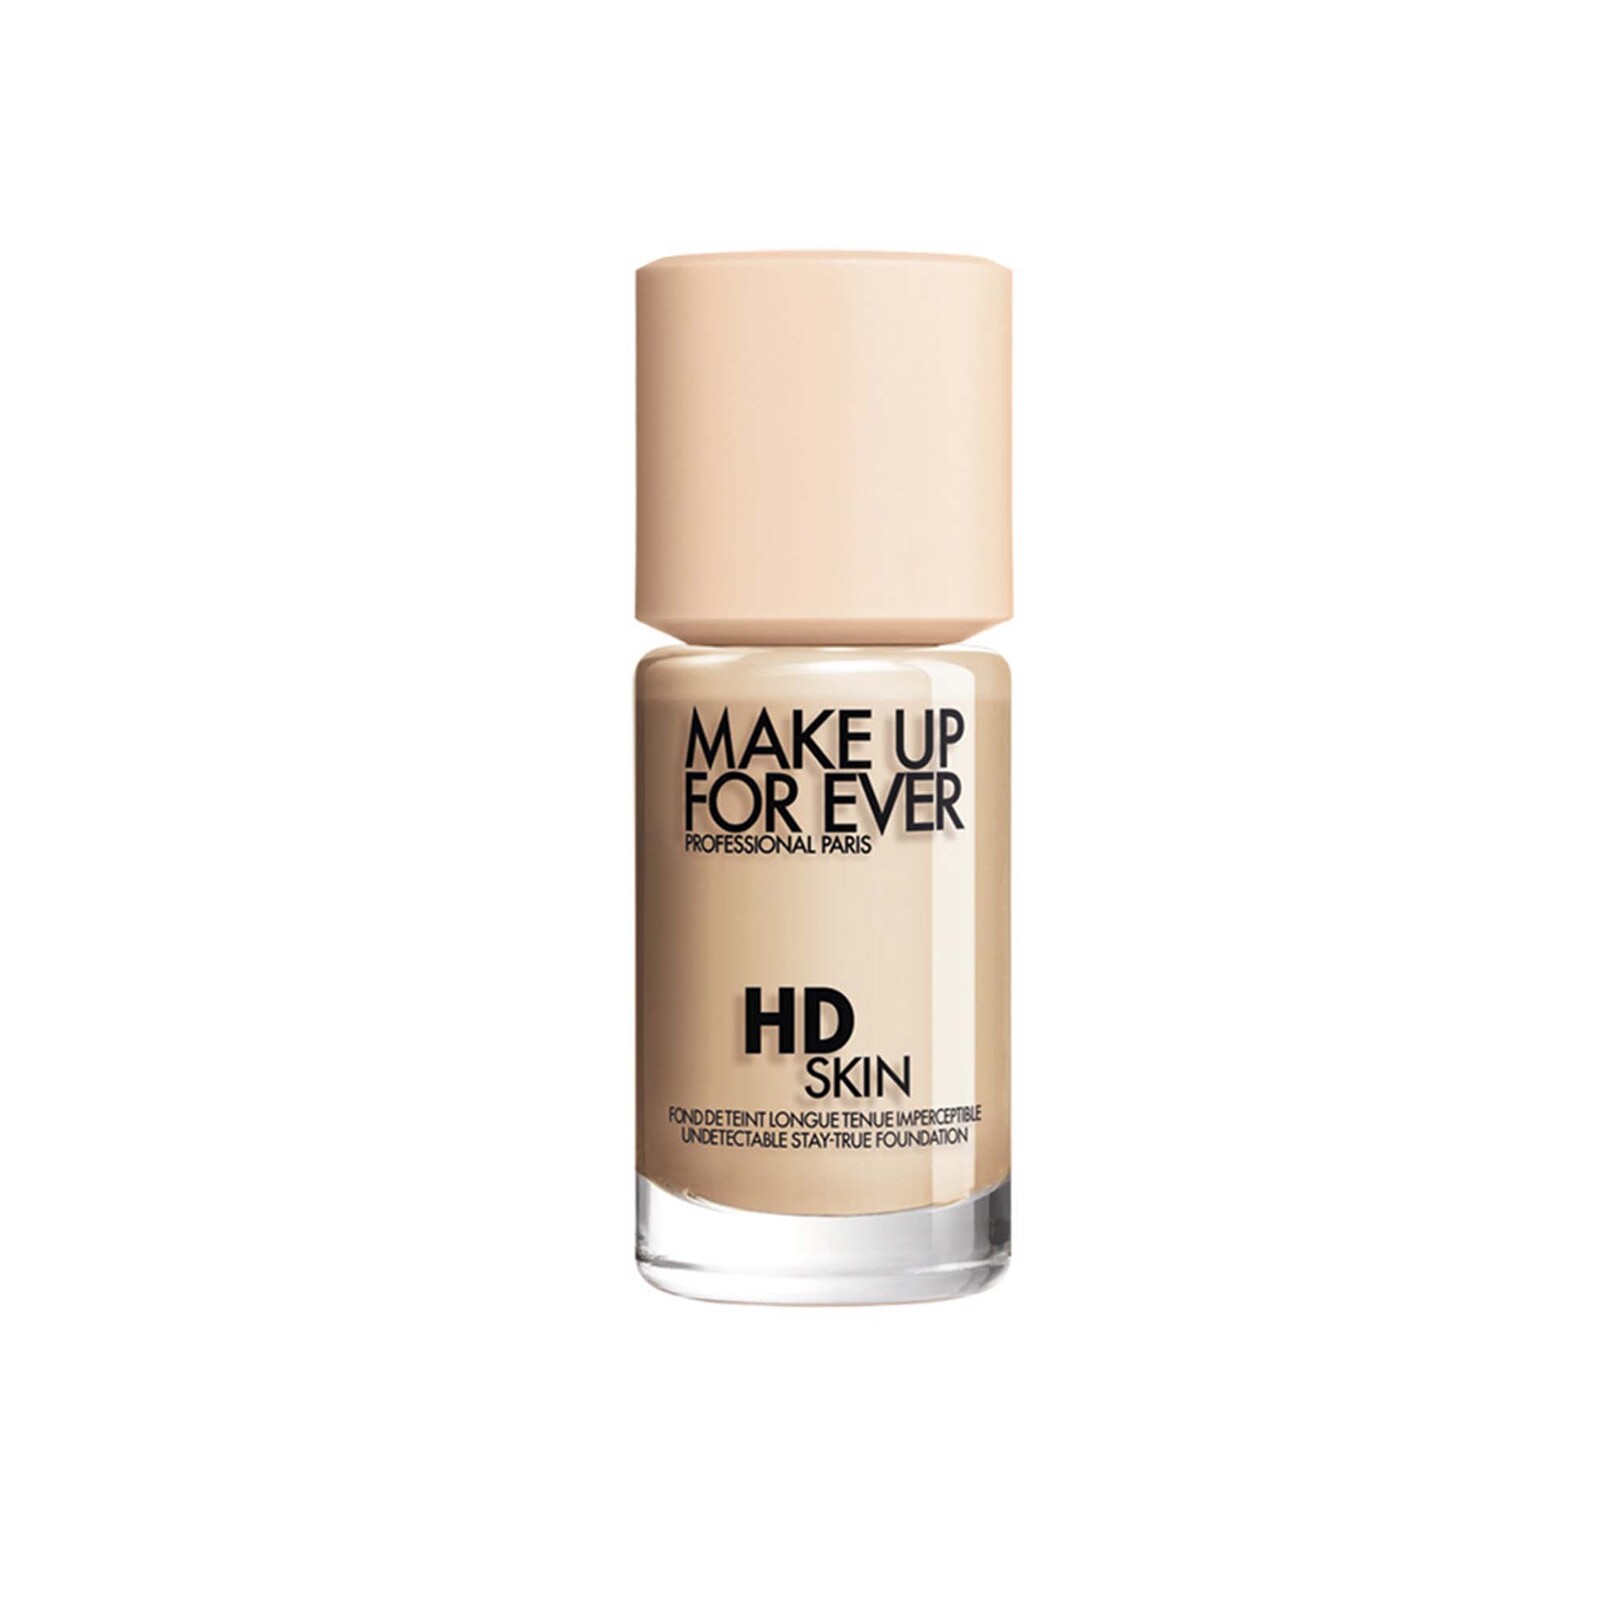 Make Up For Ever Hd Skin Foundation 30Ml 1N10 Ivory  